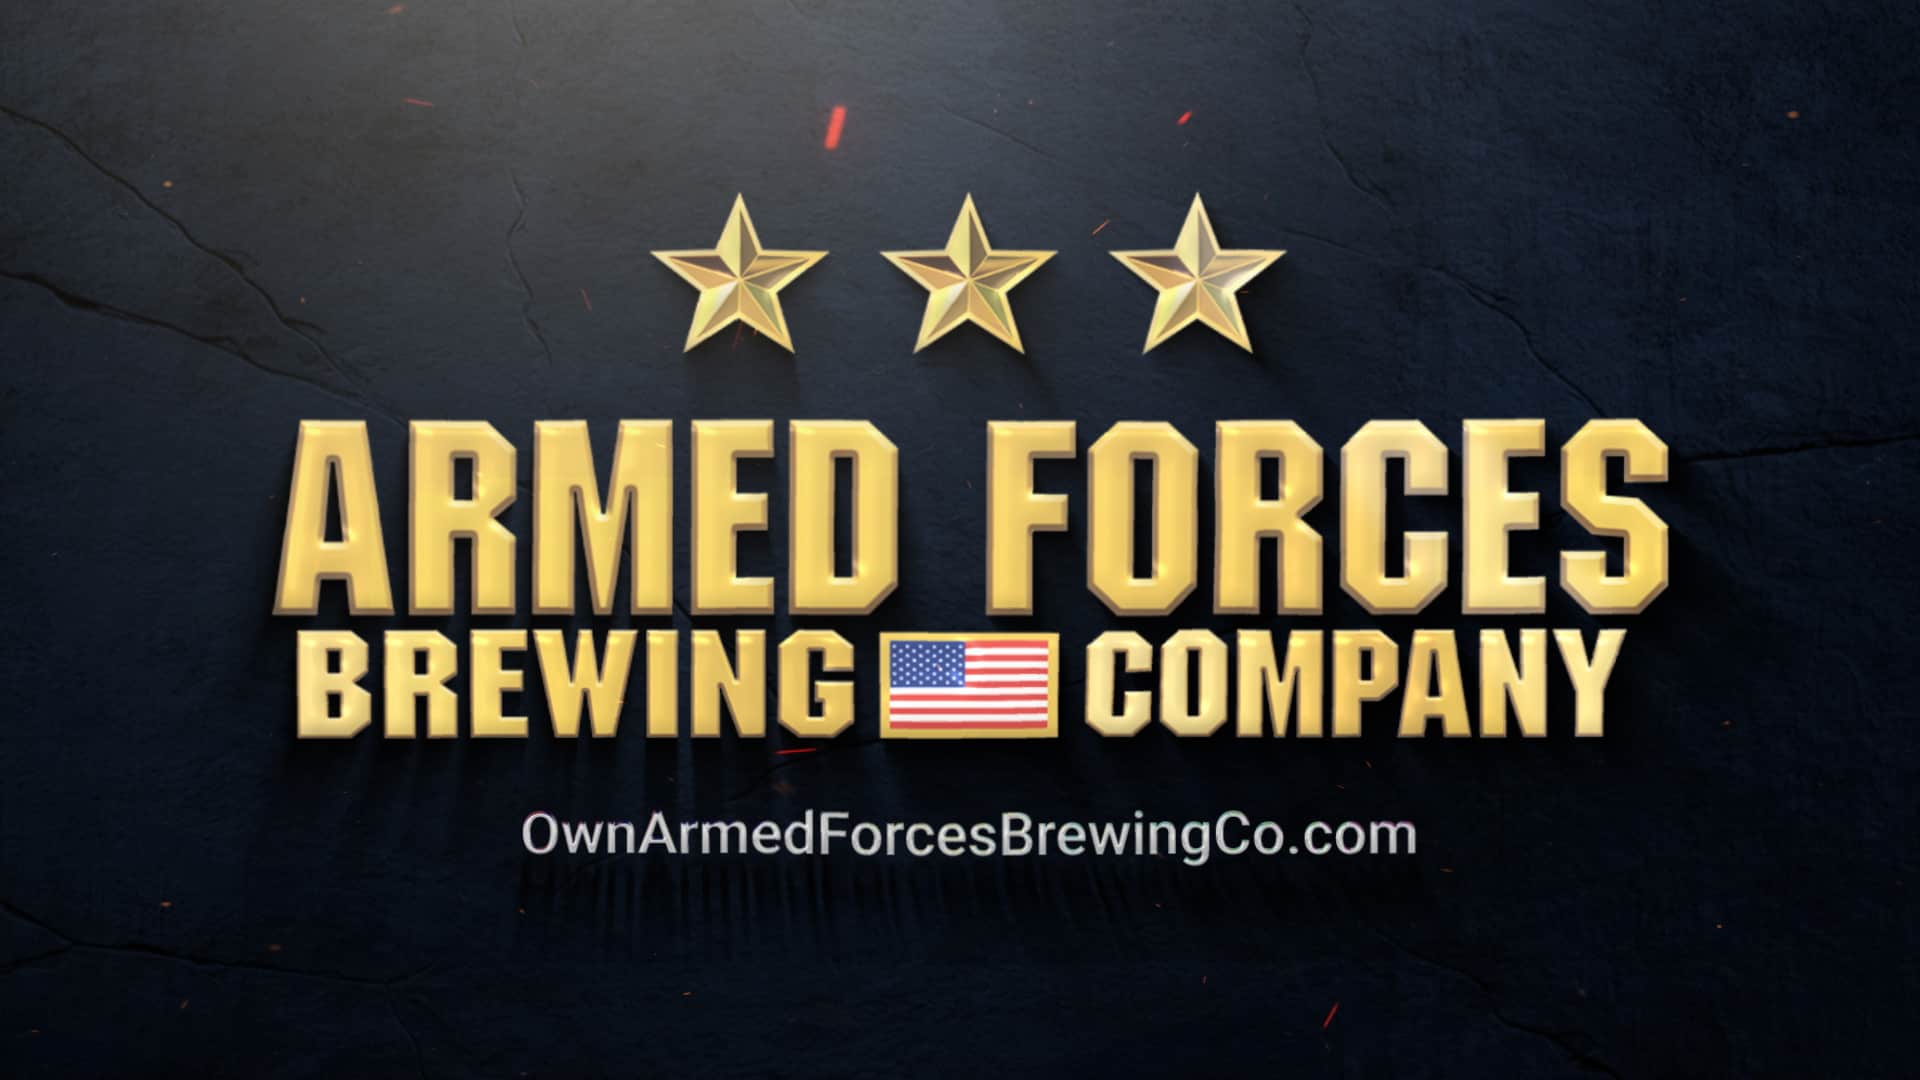 Wall Of Investors - Own Armed Forces Brewing Co.